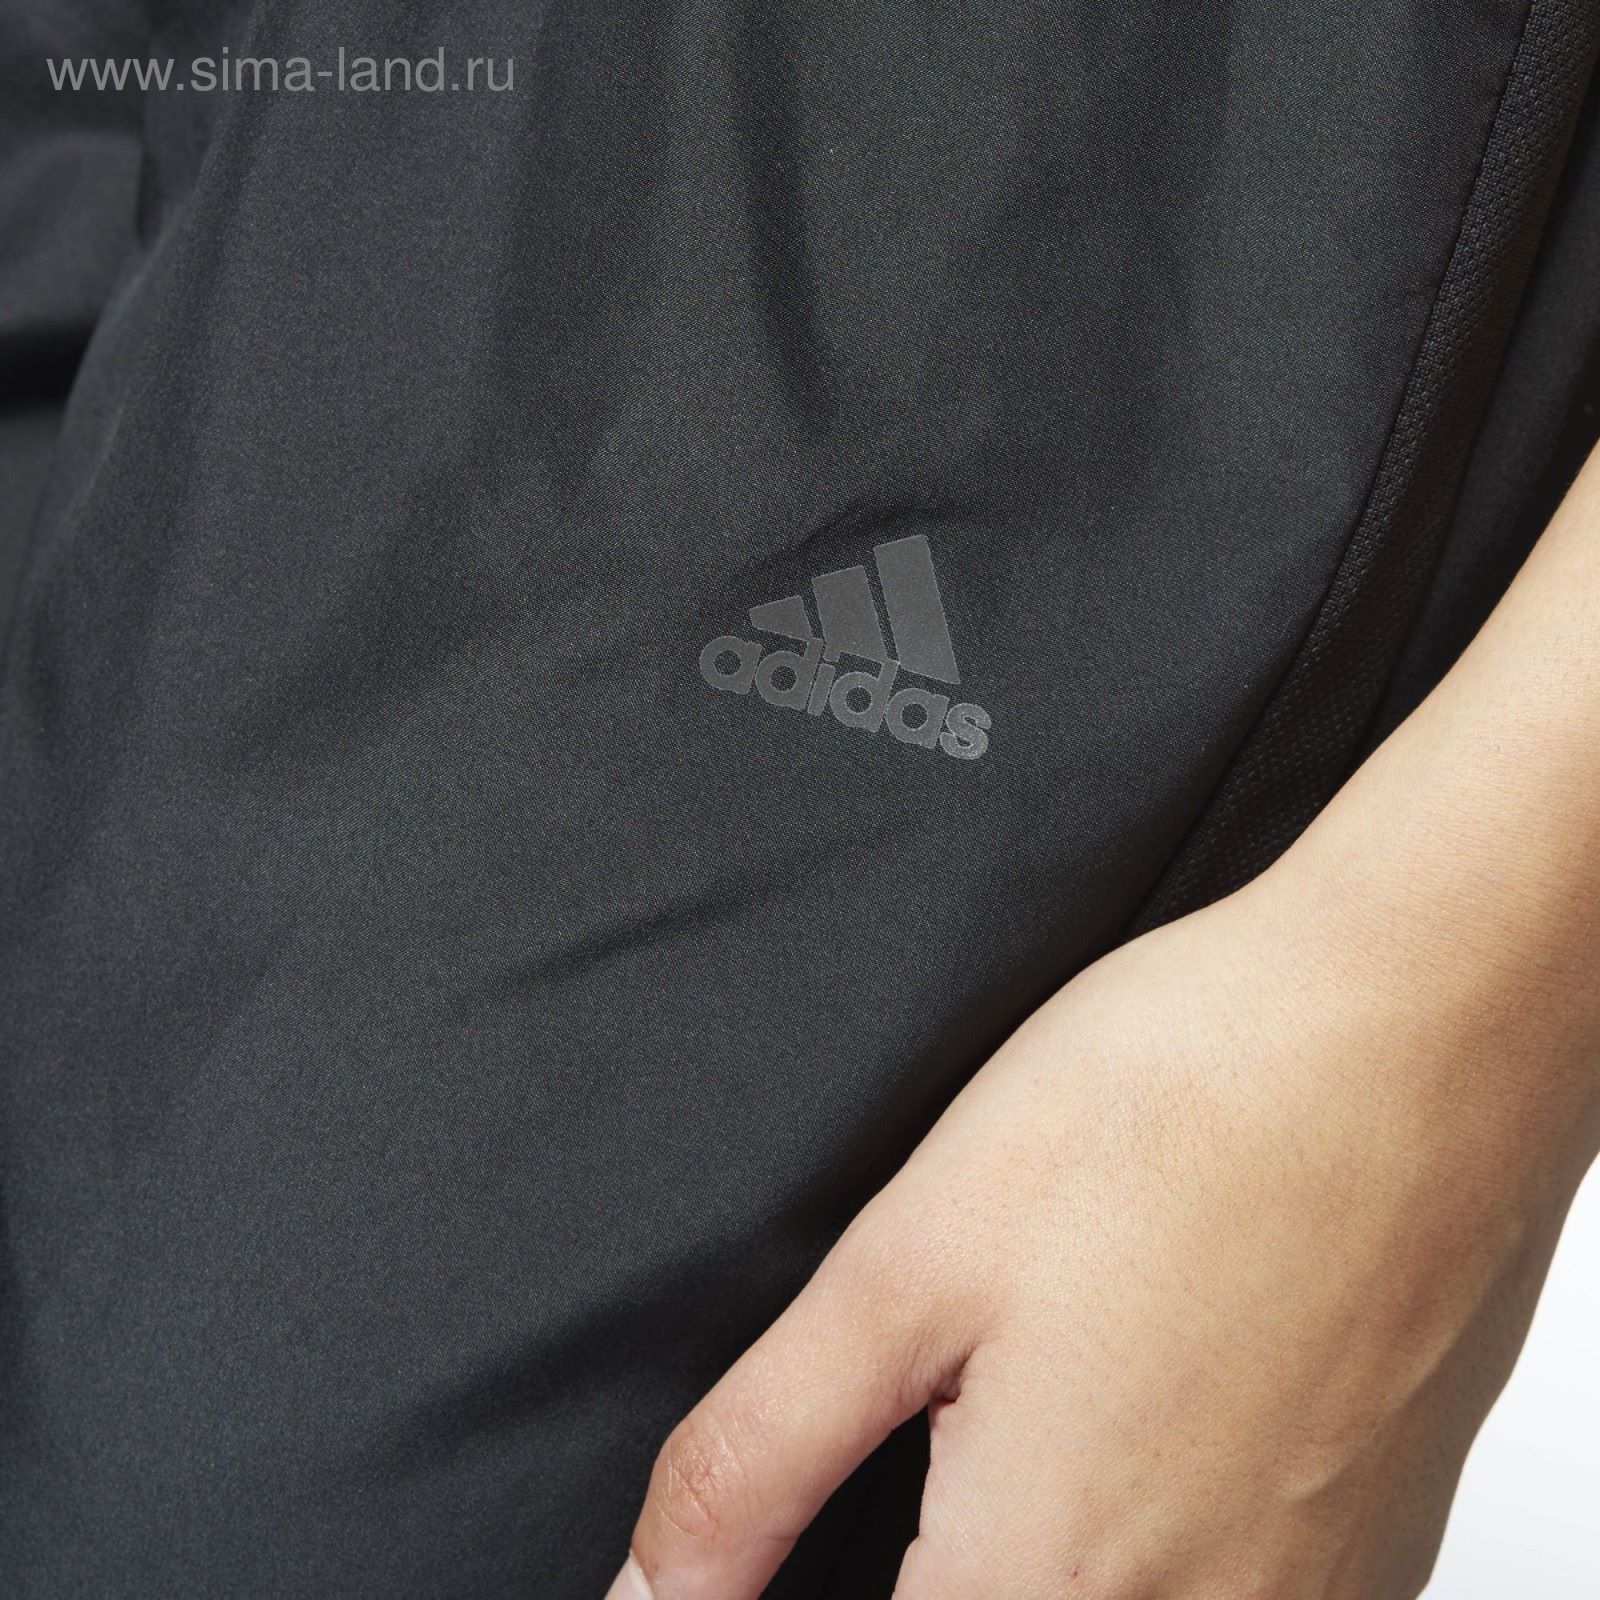 adidas rs wind pant